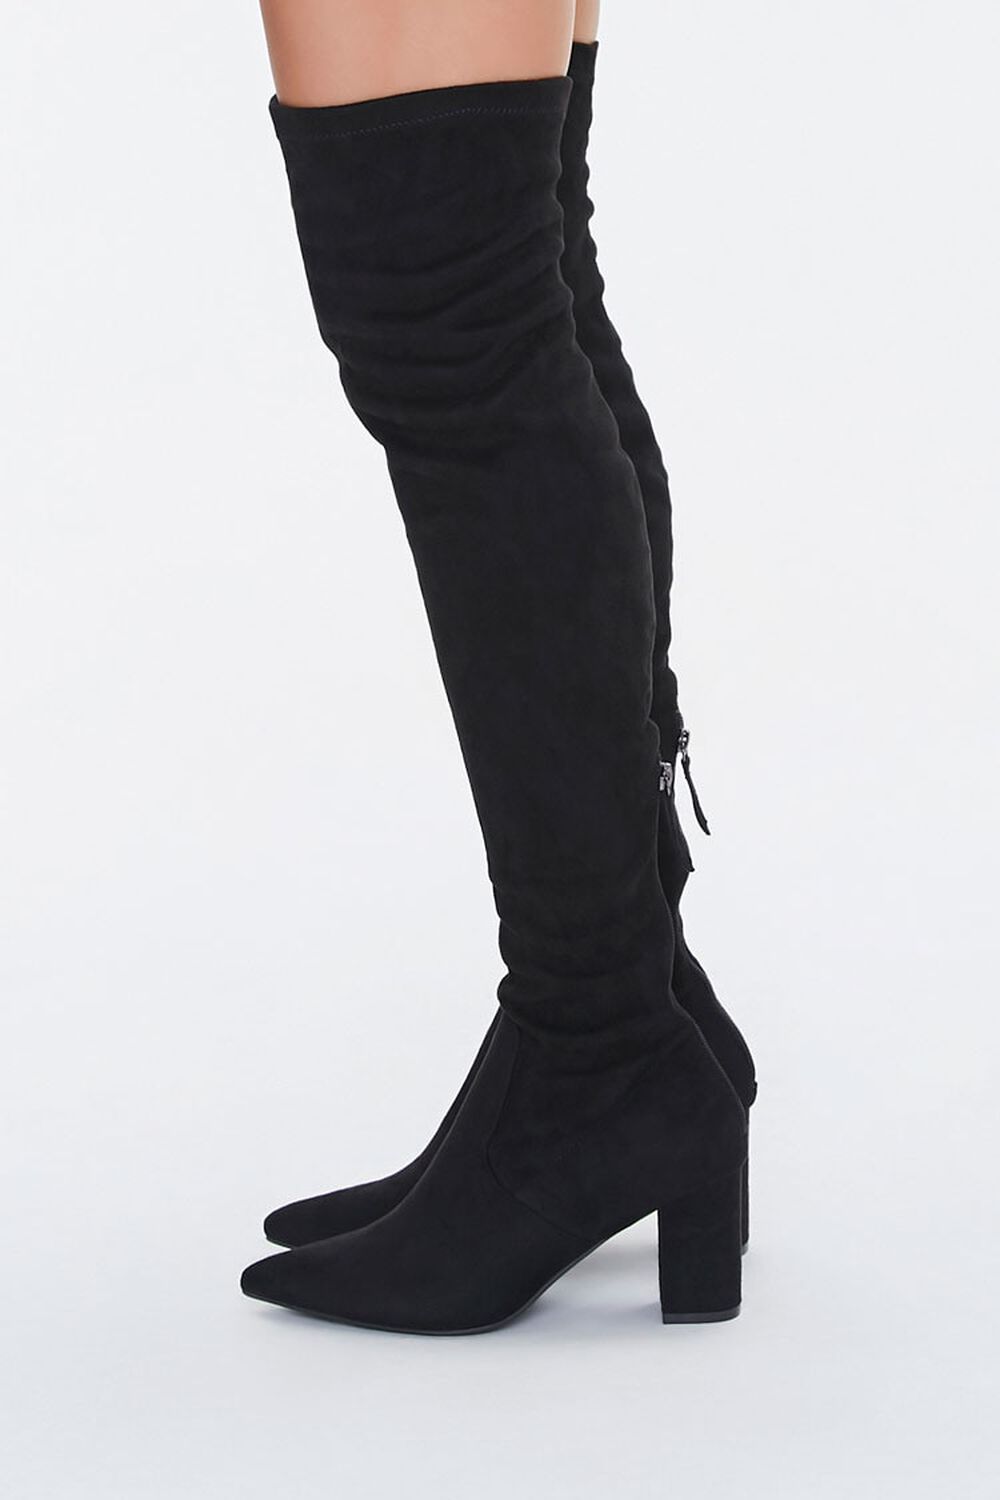 Faux Suede Over-the-Knee Boots, image 2